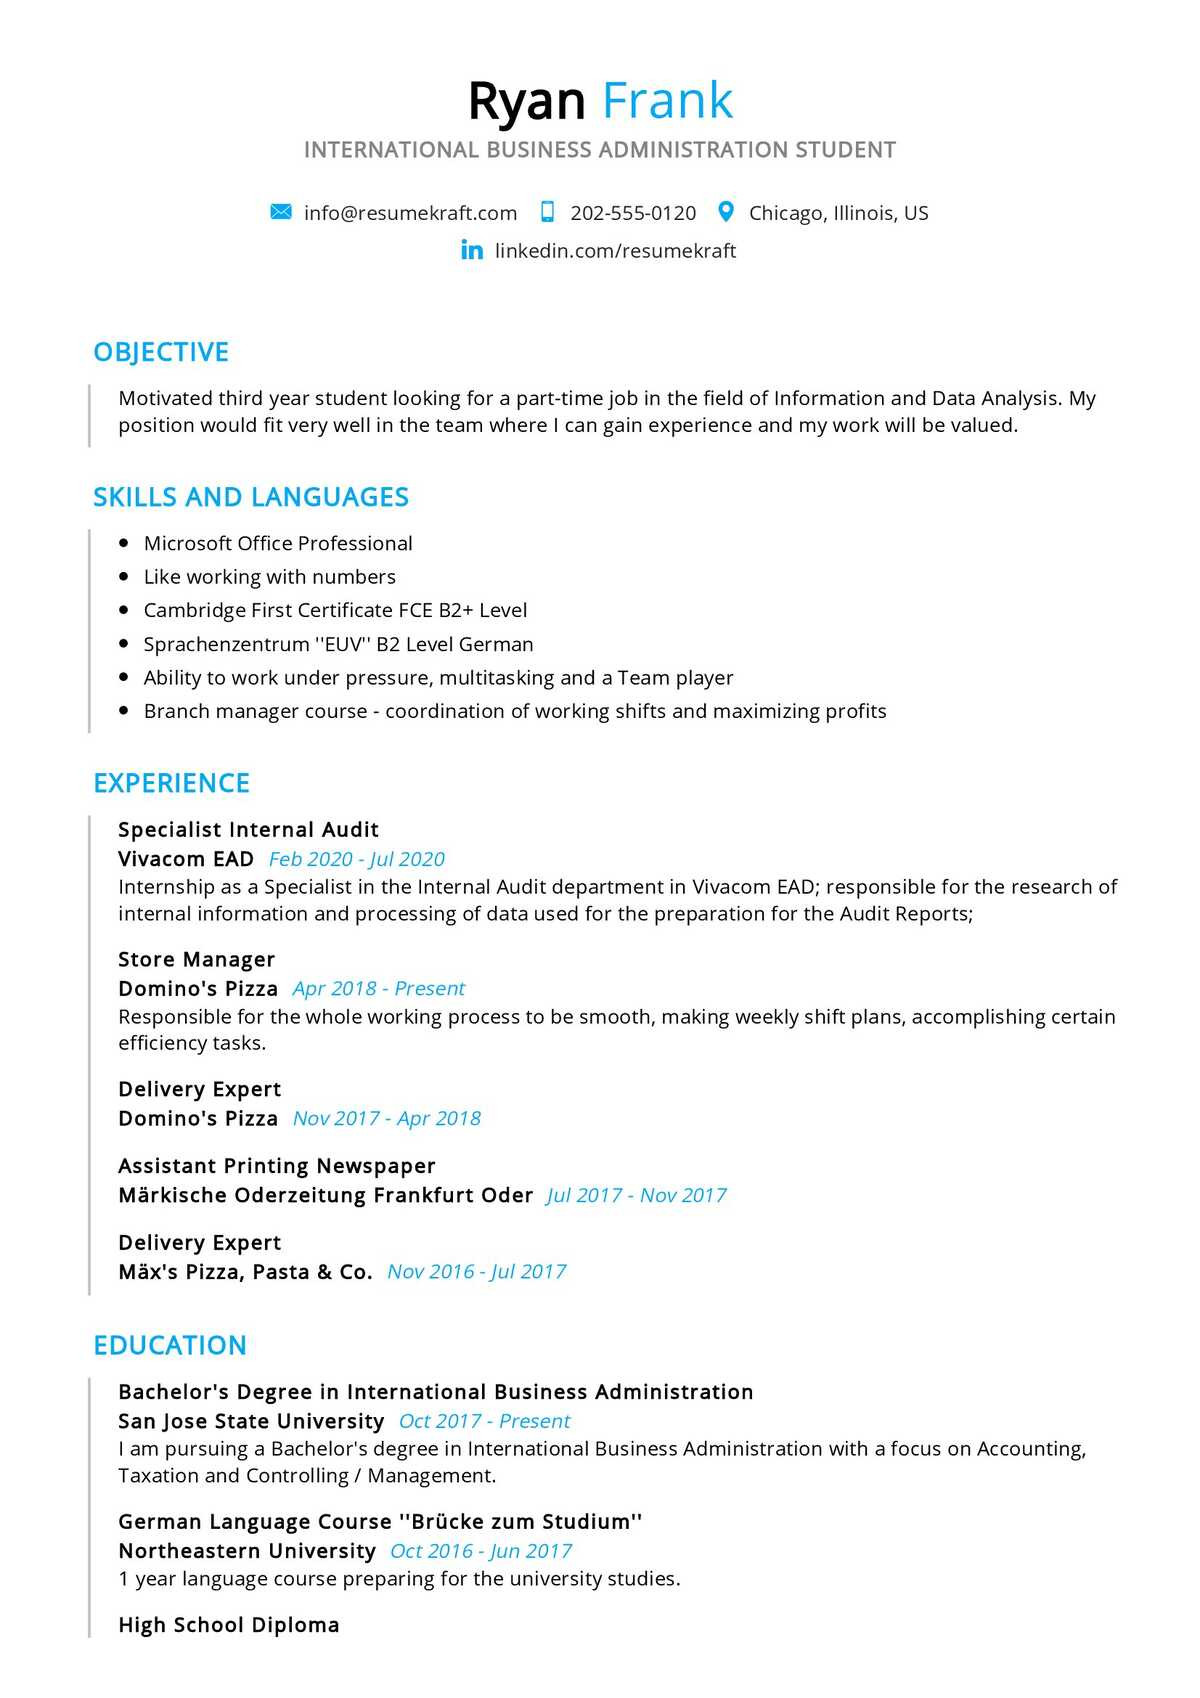 Resume Sample for Business Administration Student Business Student Resume Sample 2021 Writing Tips – Resumekraft